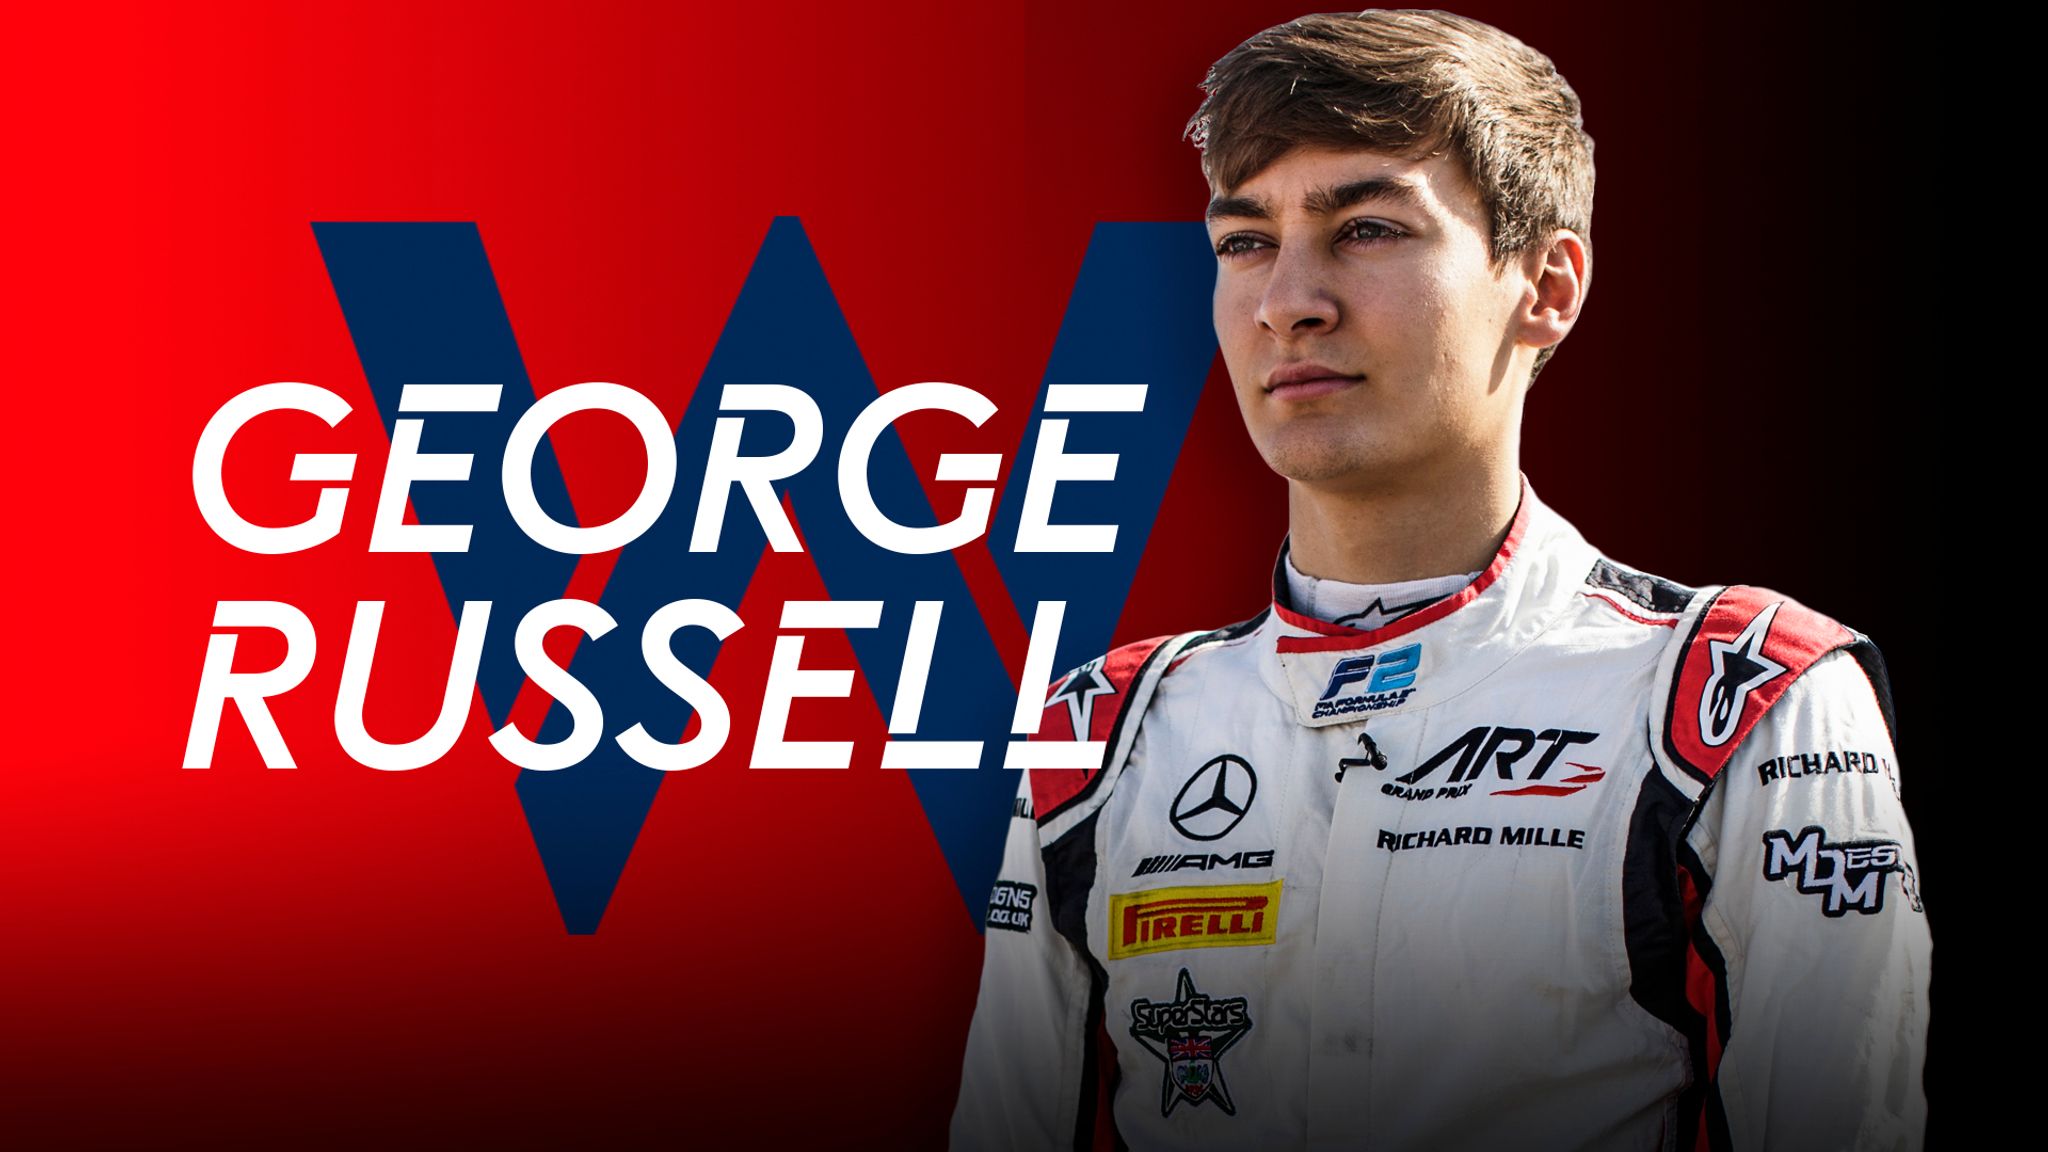 George Russell joins Williams for Formula 1 2019